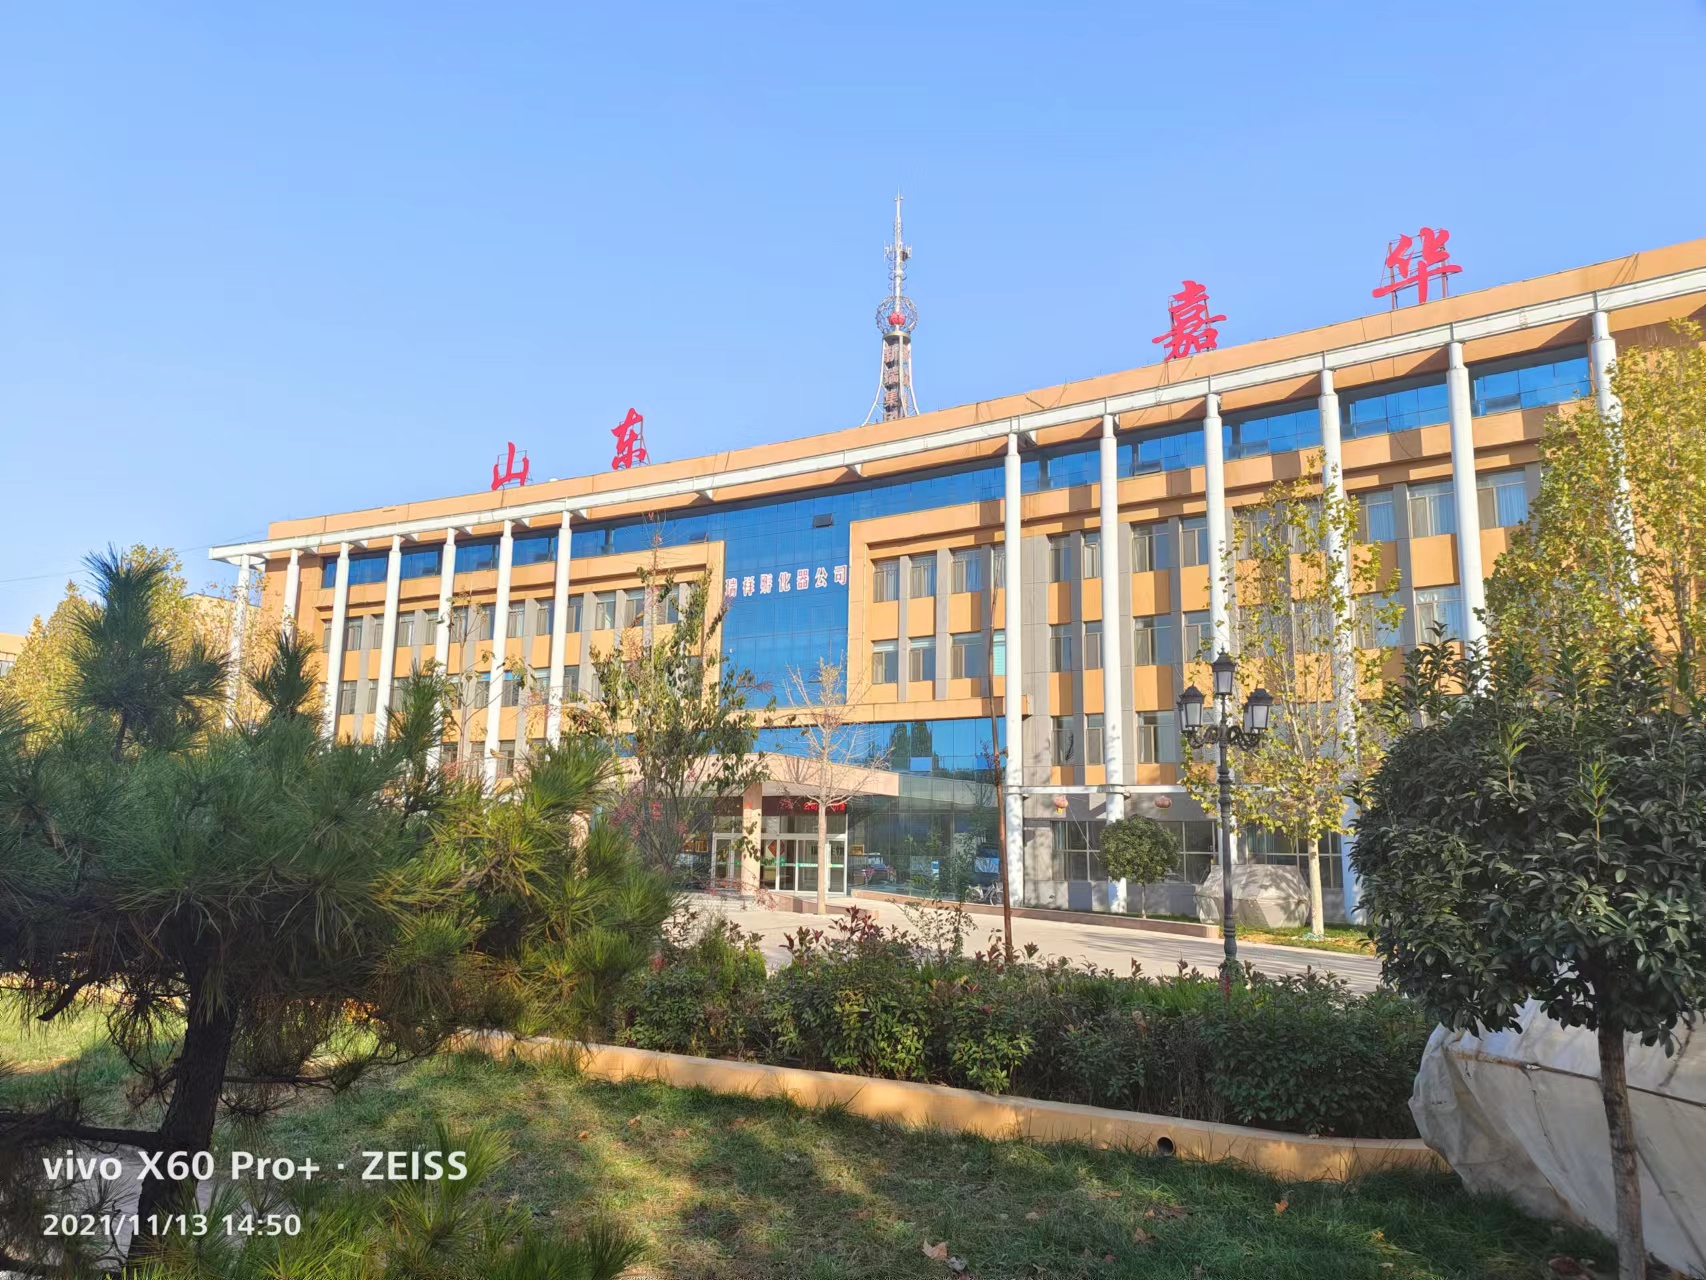 Guanxian Xinrui Group – China Plant Protein R&D and Producation Base